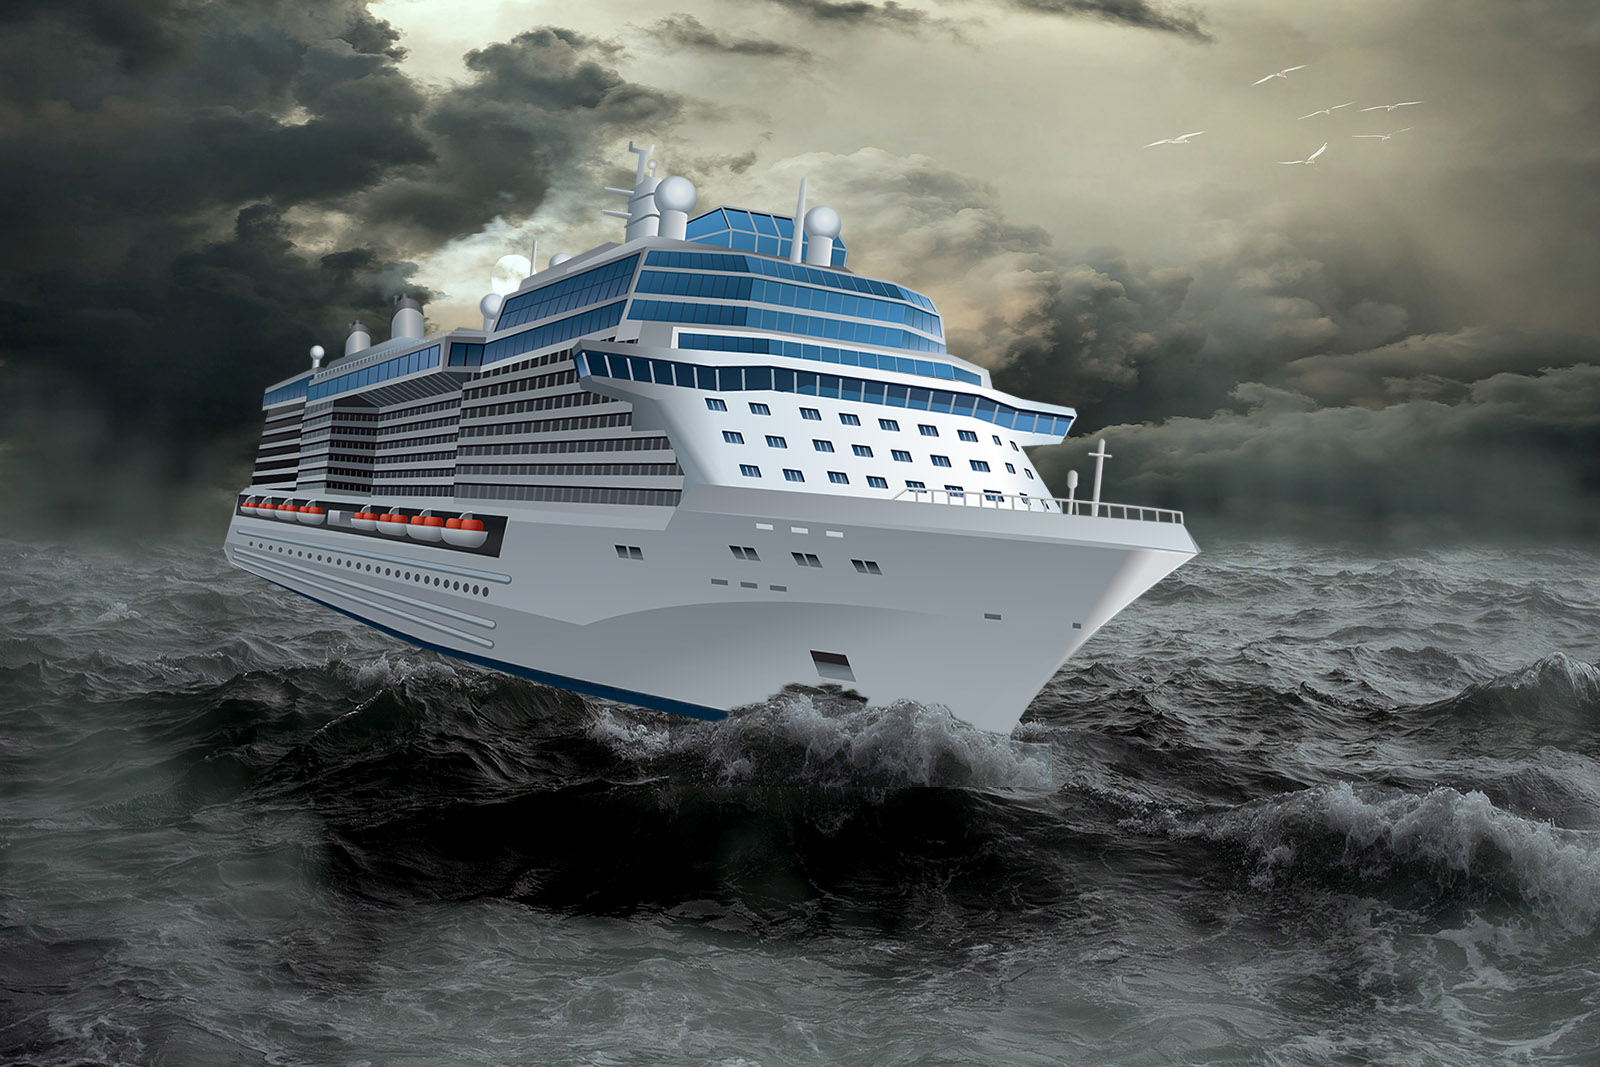 36+ Best cruise ship stability ideas in 2021 